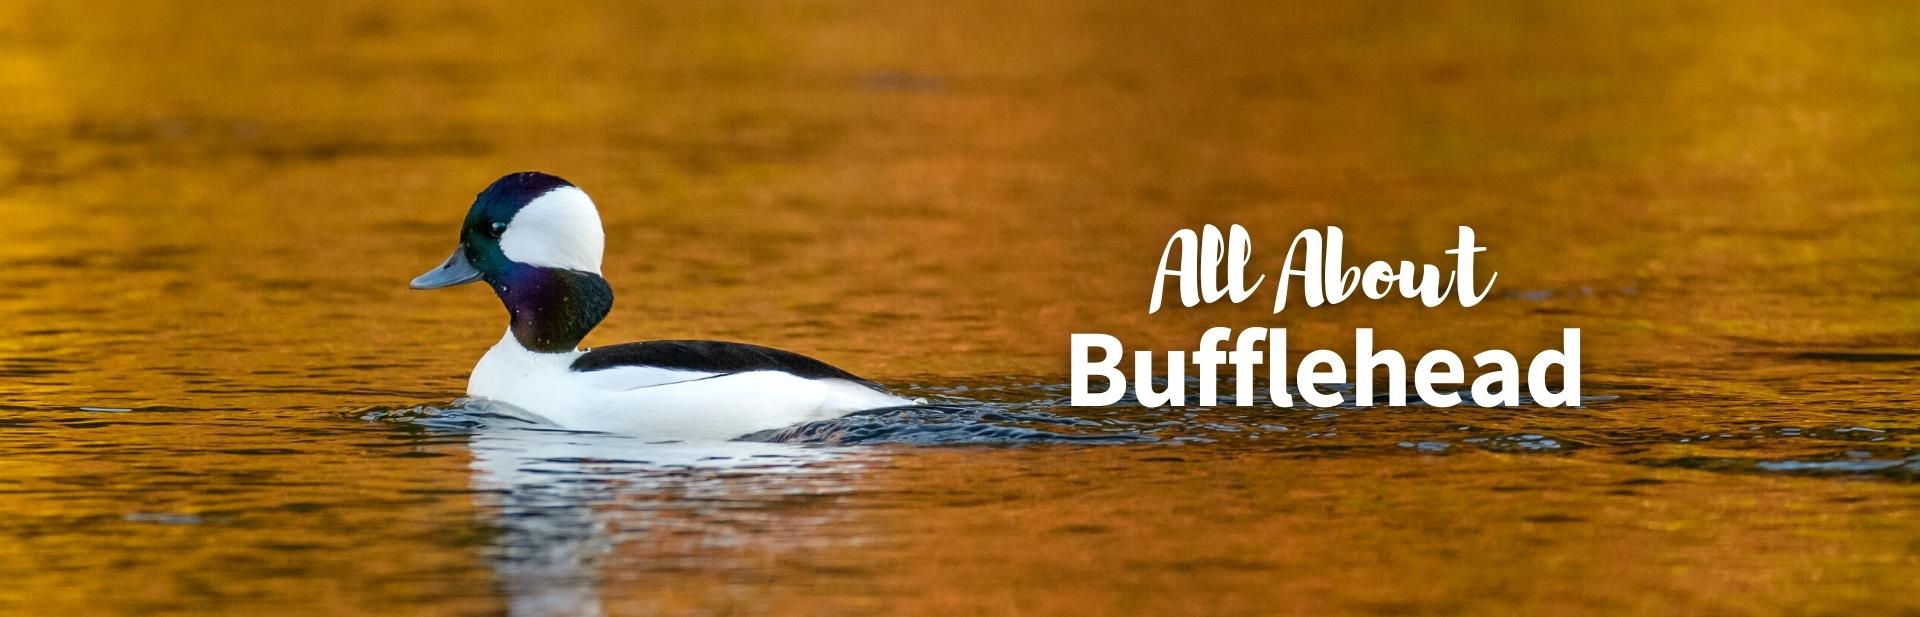 All You Need to Know About the Bufflehead and Where to Find Them